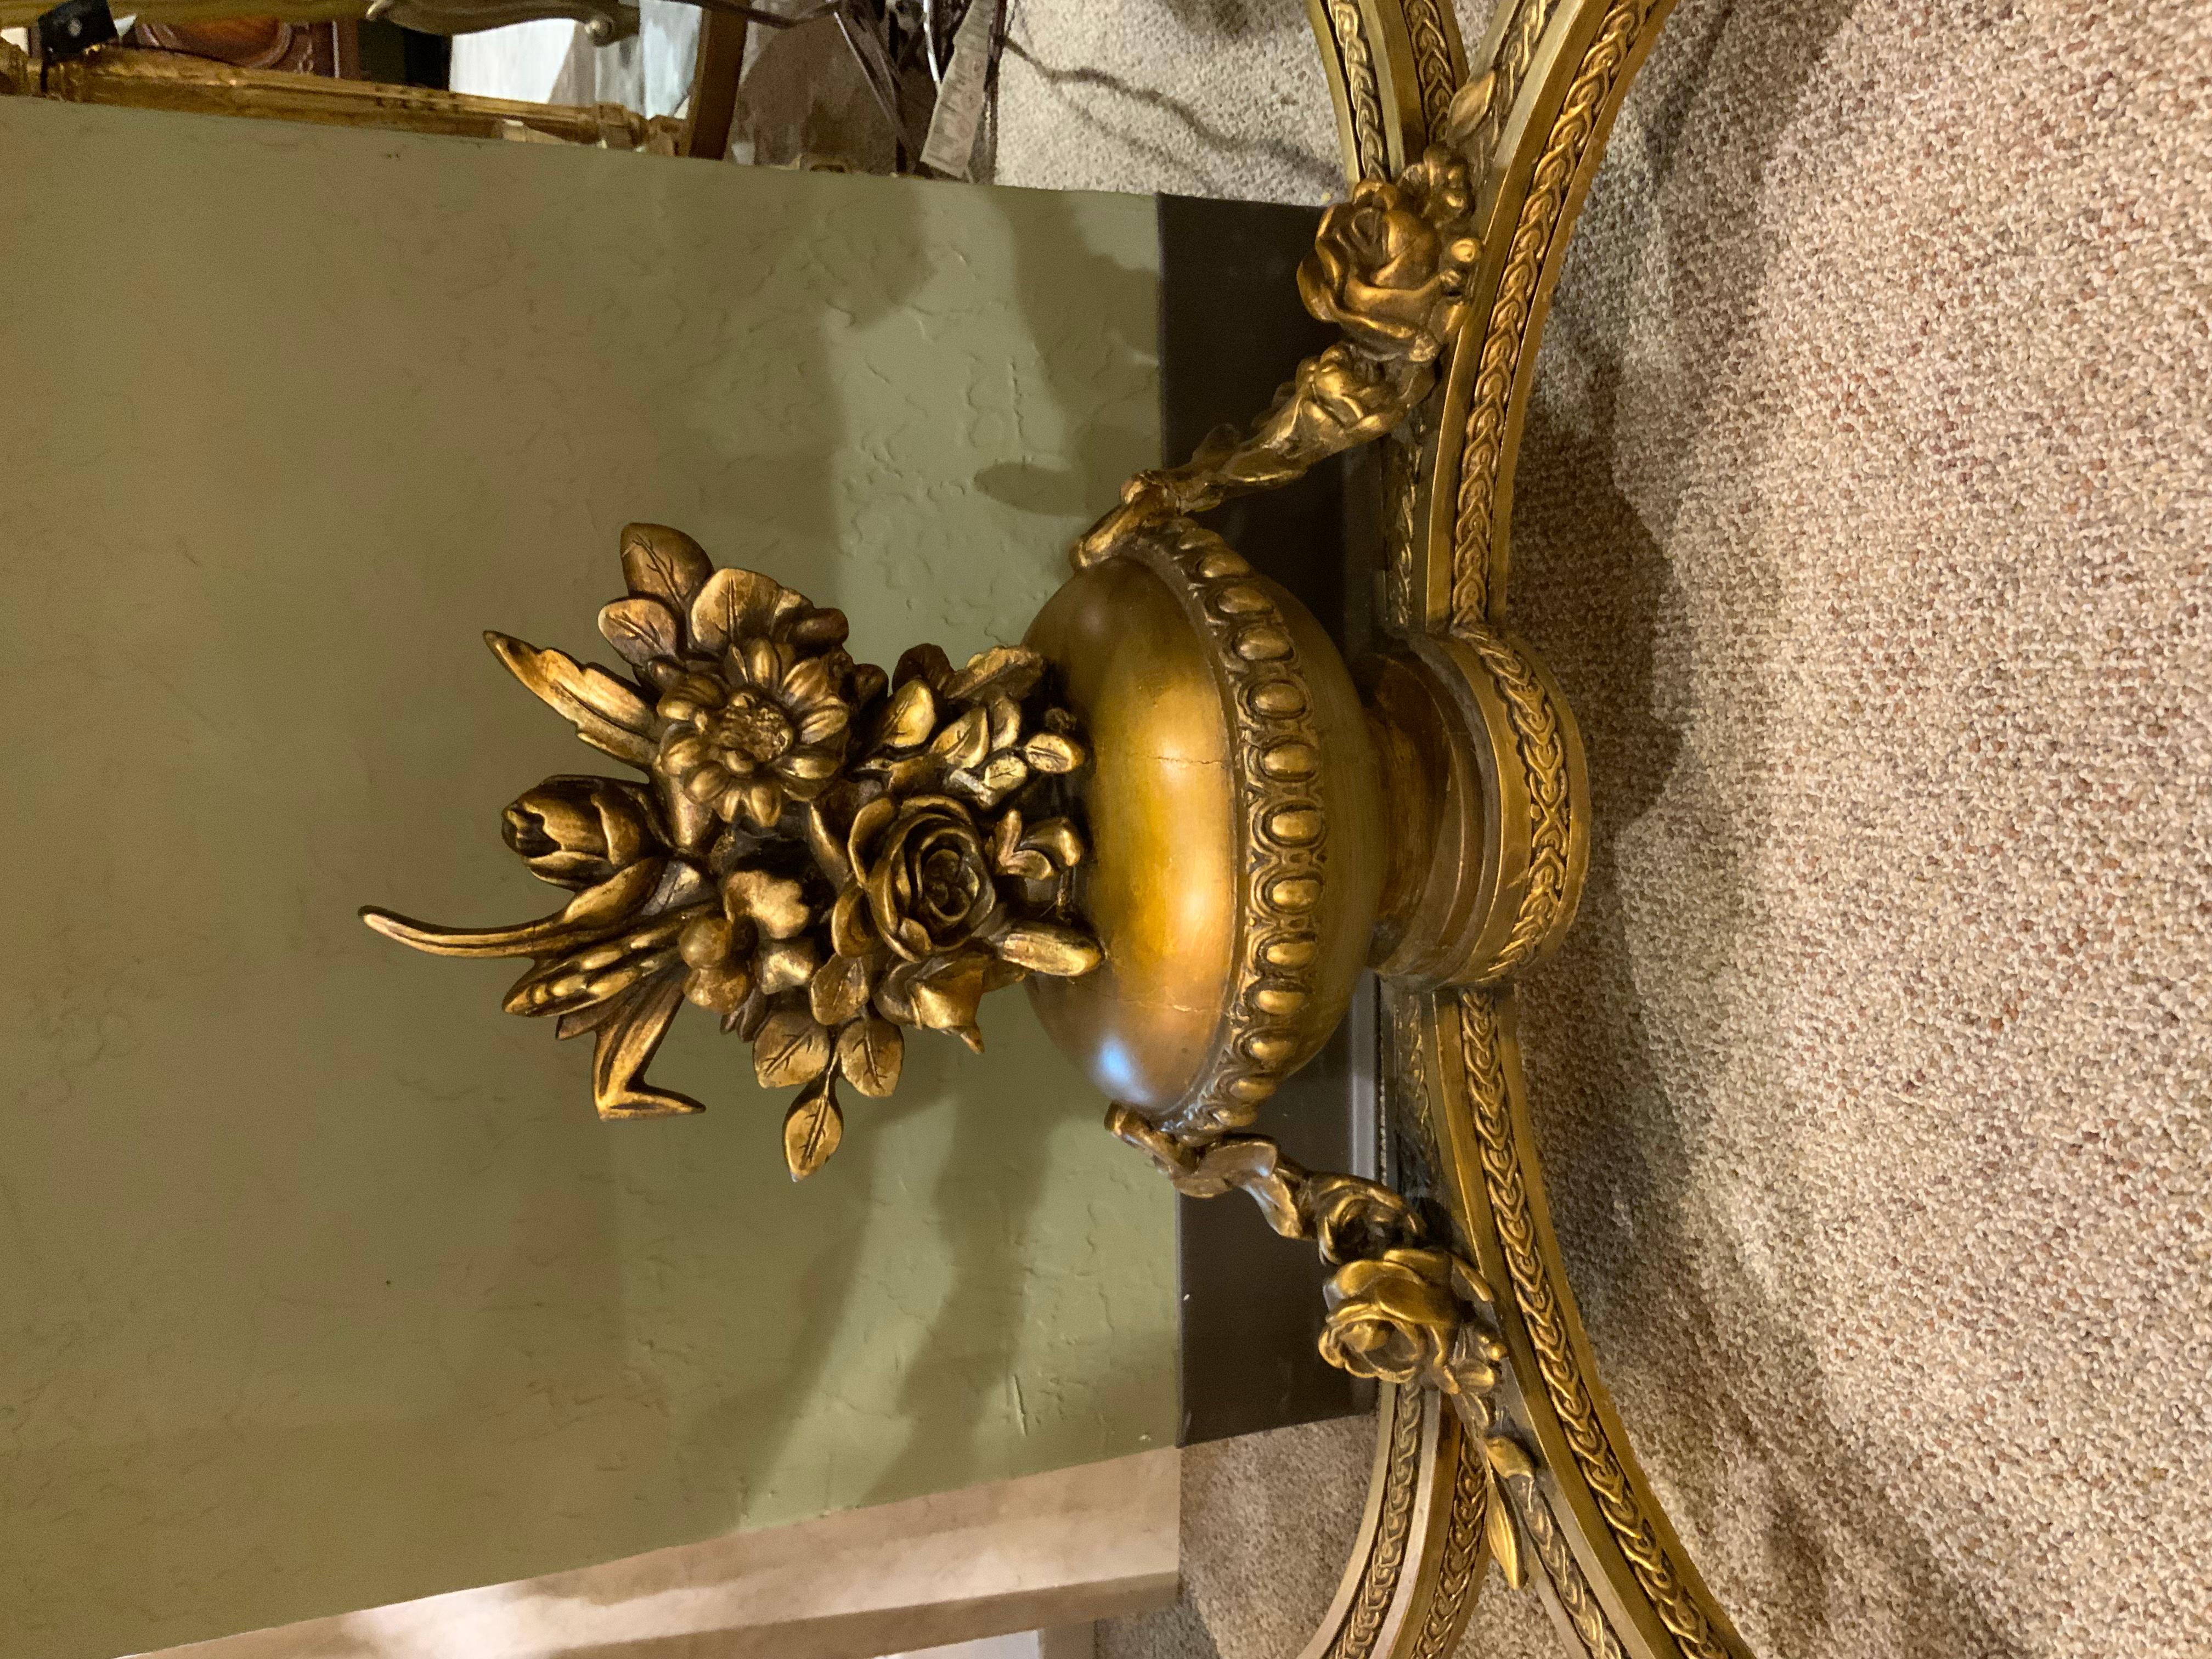 Giltwood that is hand carved with an oval shaped front, standing on four legs that are reeded
And connected by a carved stretcher that is connected with an urn at the center.
The marble is in white, gray and cream hues. The center front has a bow